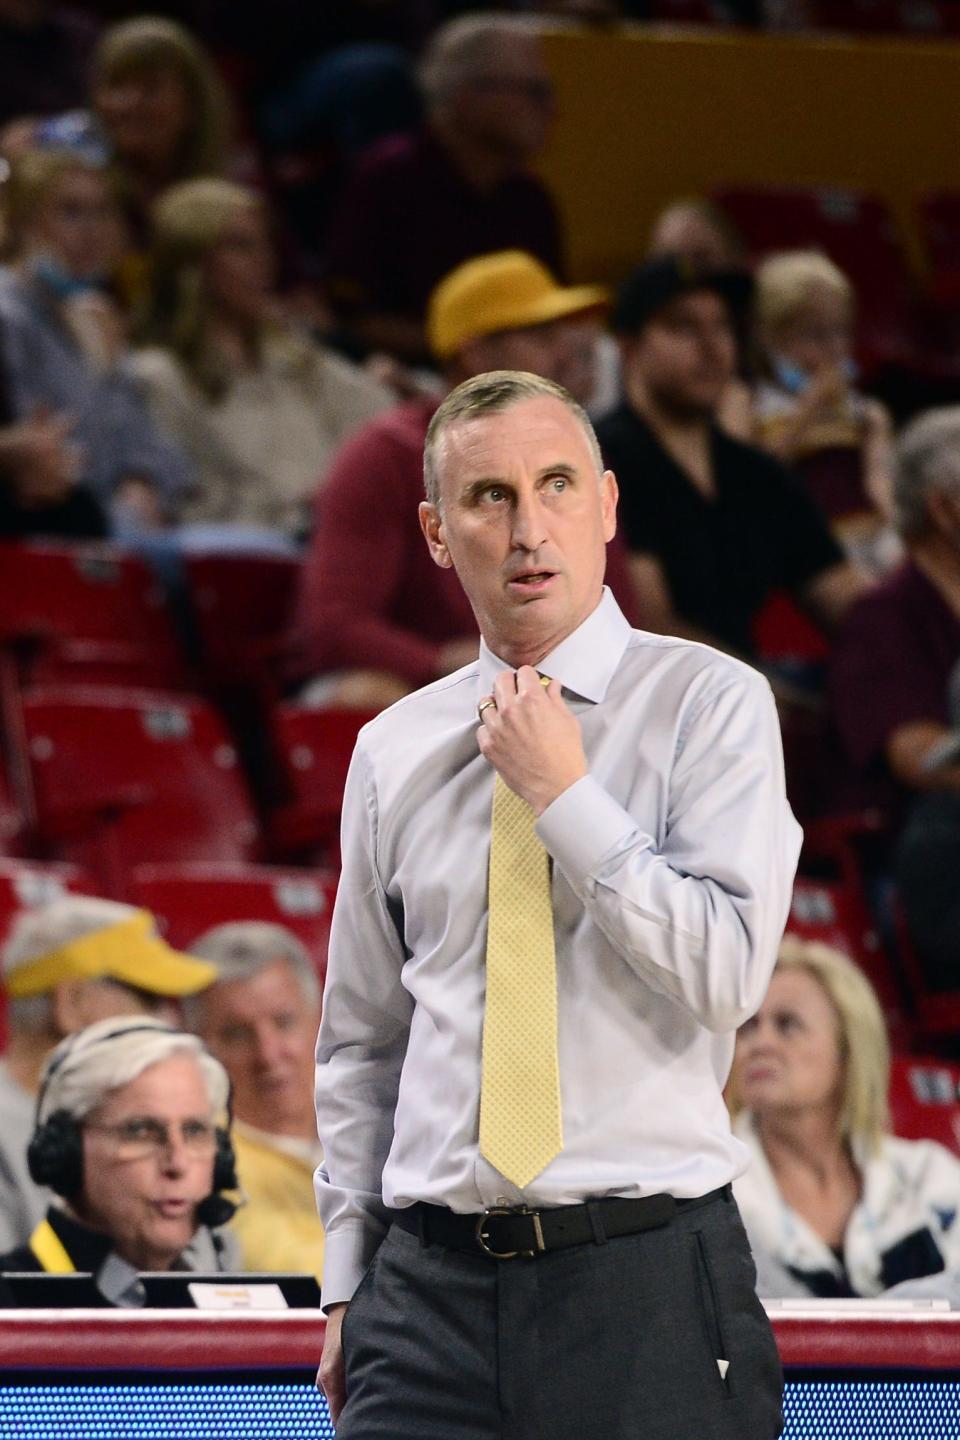 Dec 19, 2021; Tempe, Arizona, USA; Arizona State Sun Devils head coach Bobby Hurley looks on against the San Francisco Dons during the first half at Desert Financial Arena. Mandatory Credit: Joe Camporeale-USA TODAY Sports